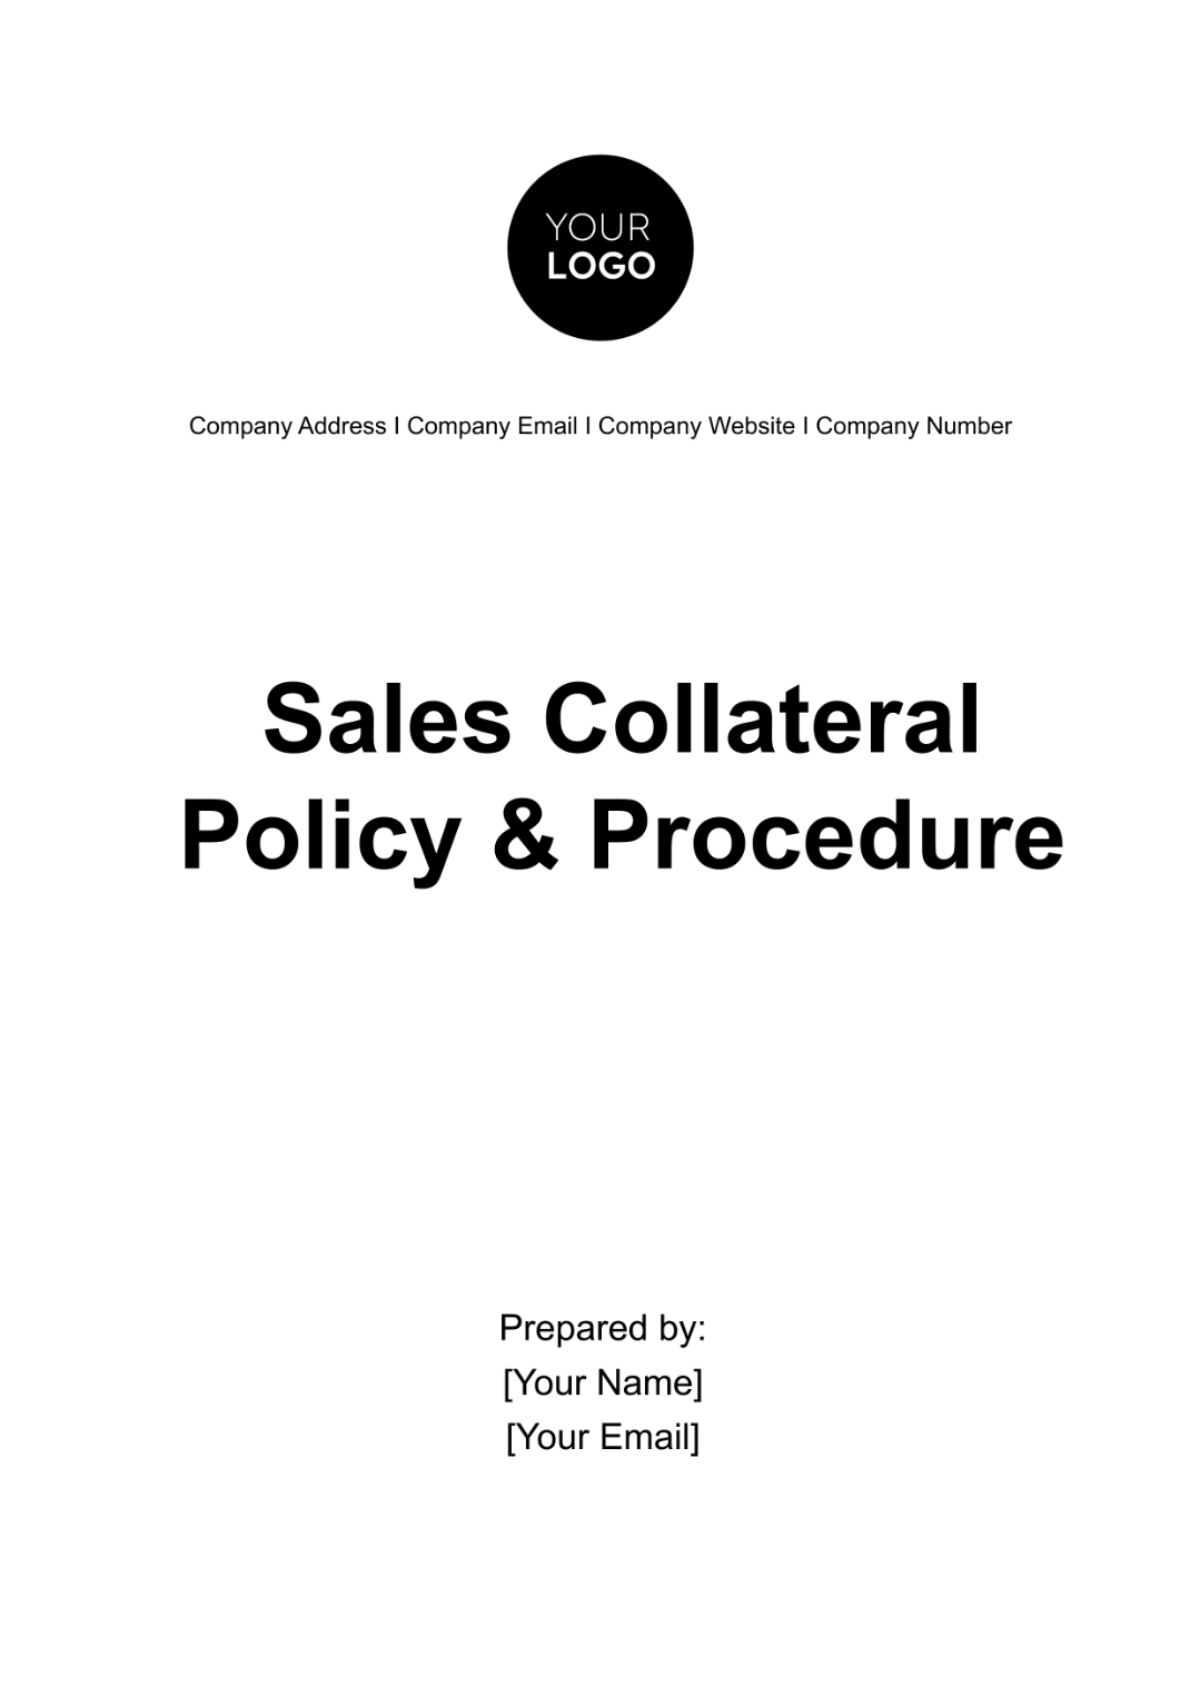 Free Sales Collateral Policy & Procedure Template